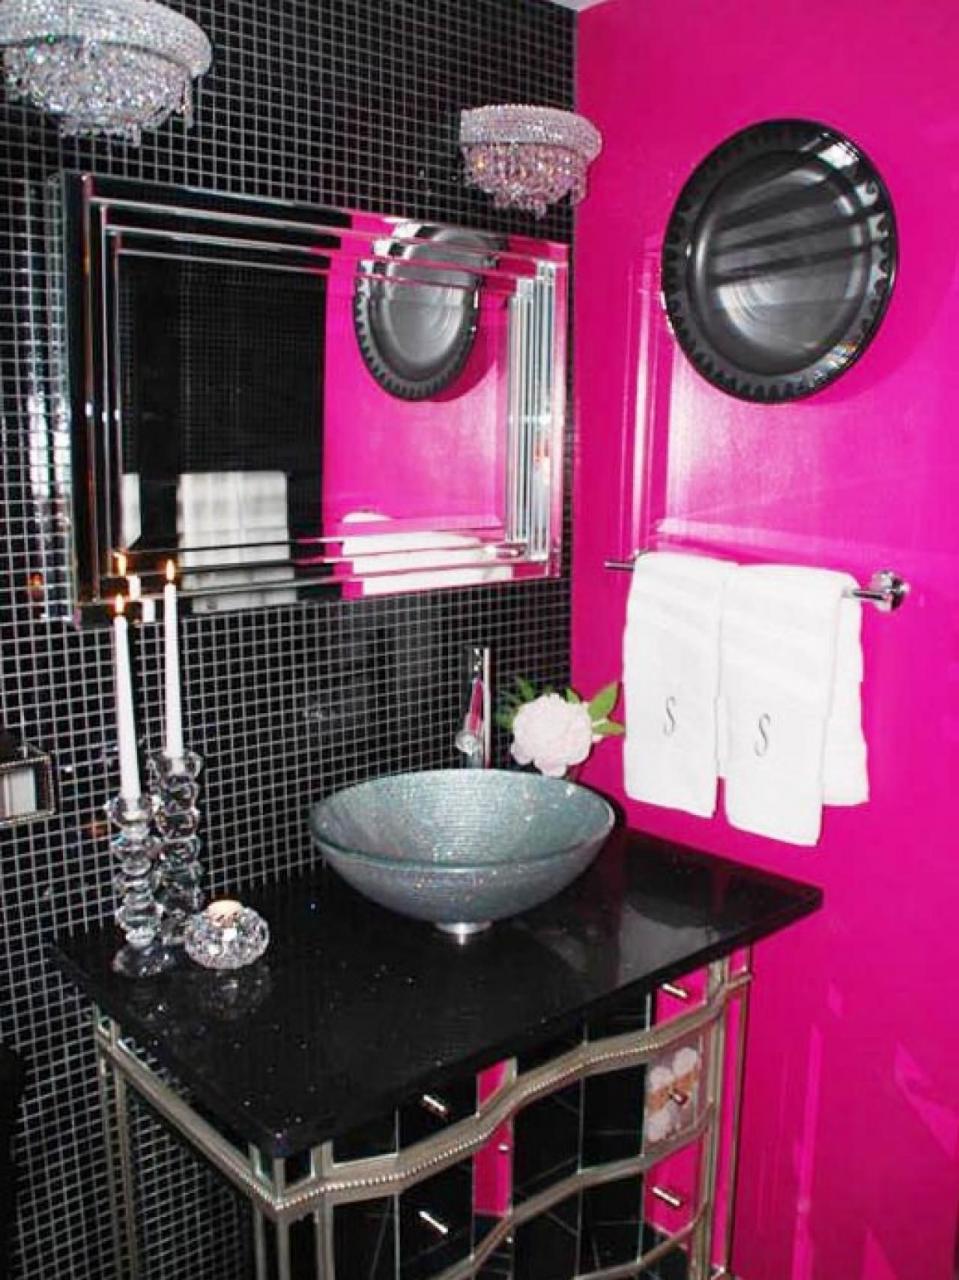 Hot Pink Bathroom Accessories I've been meaning to share this fun